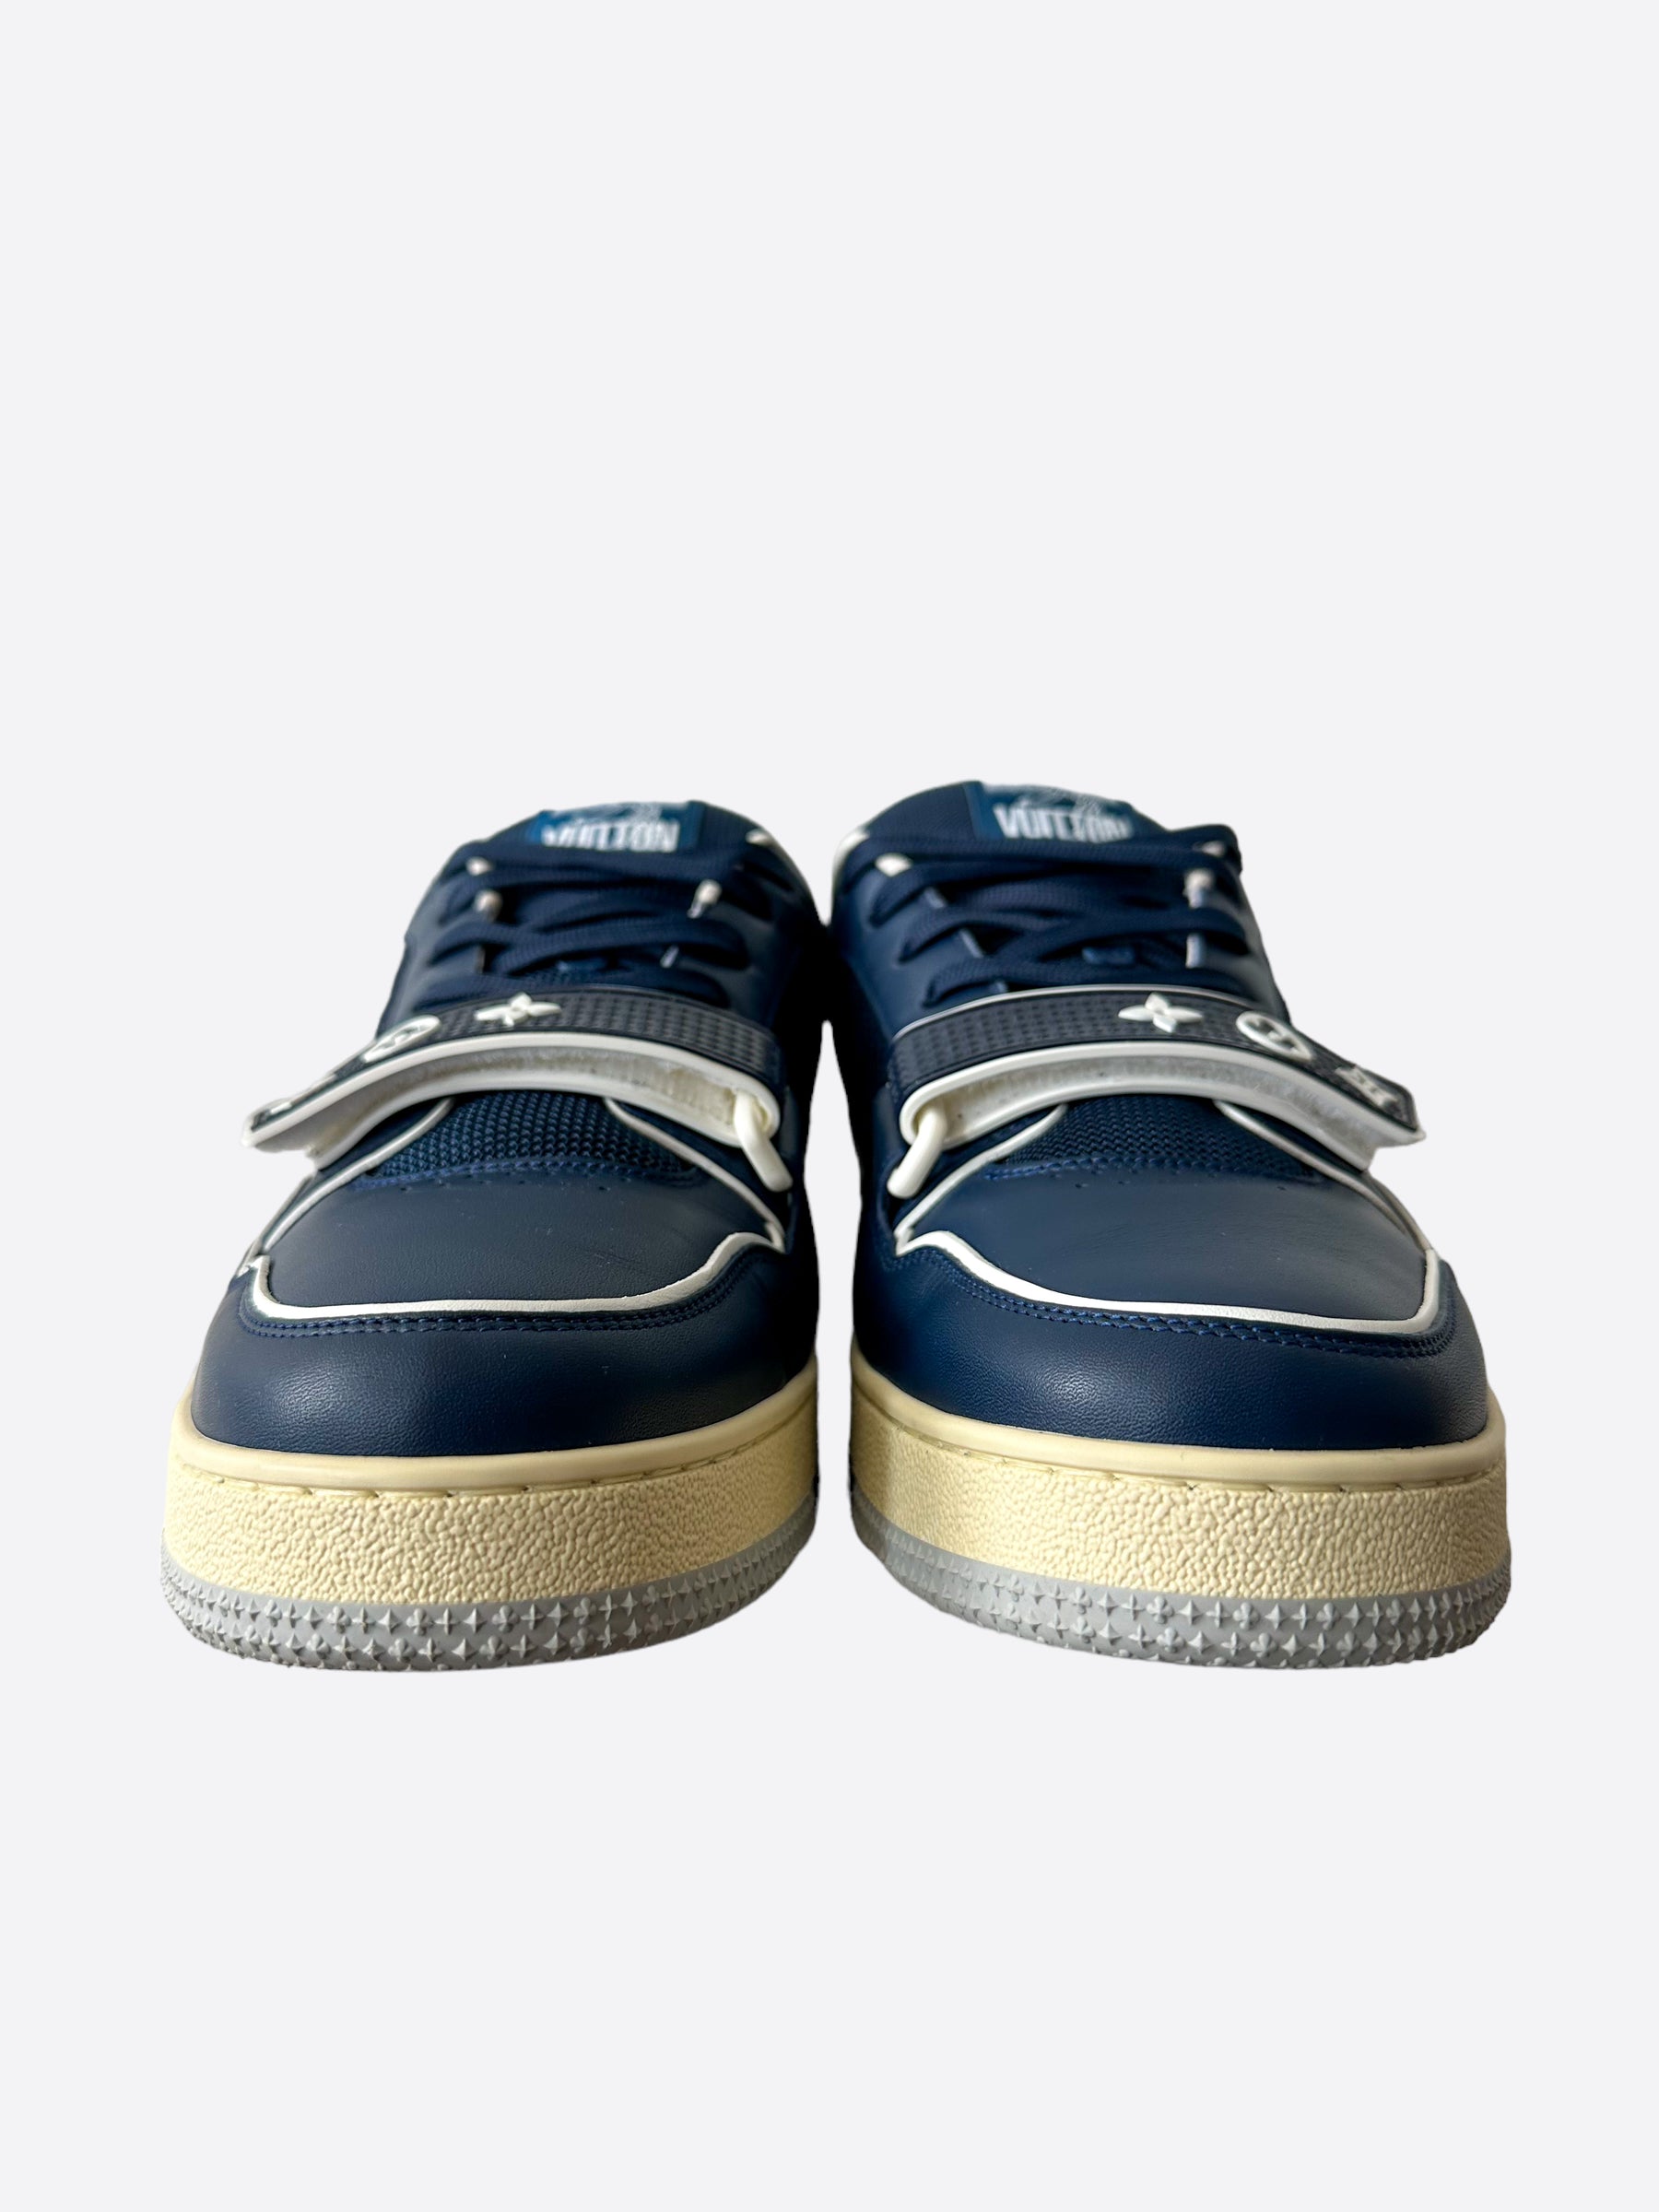 Louis Vuitton New York City Exclusive Navy Mesh Trainers